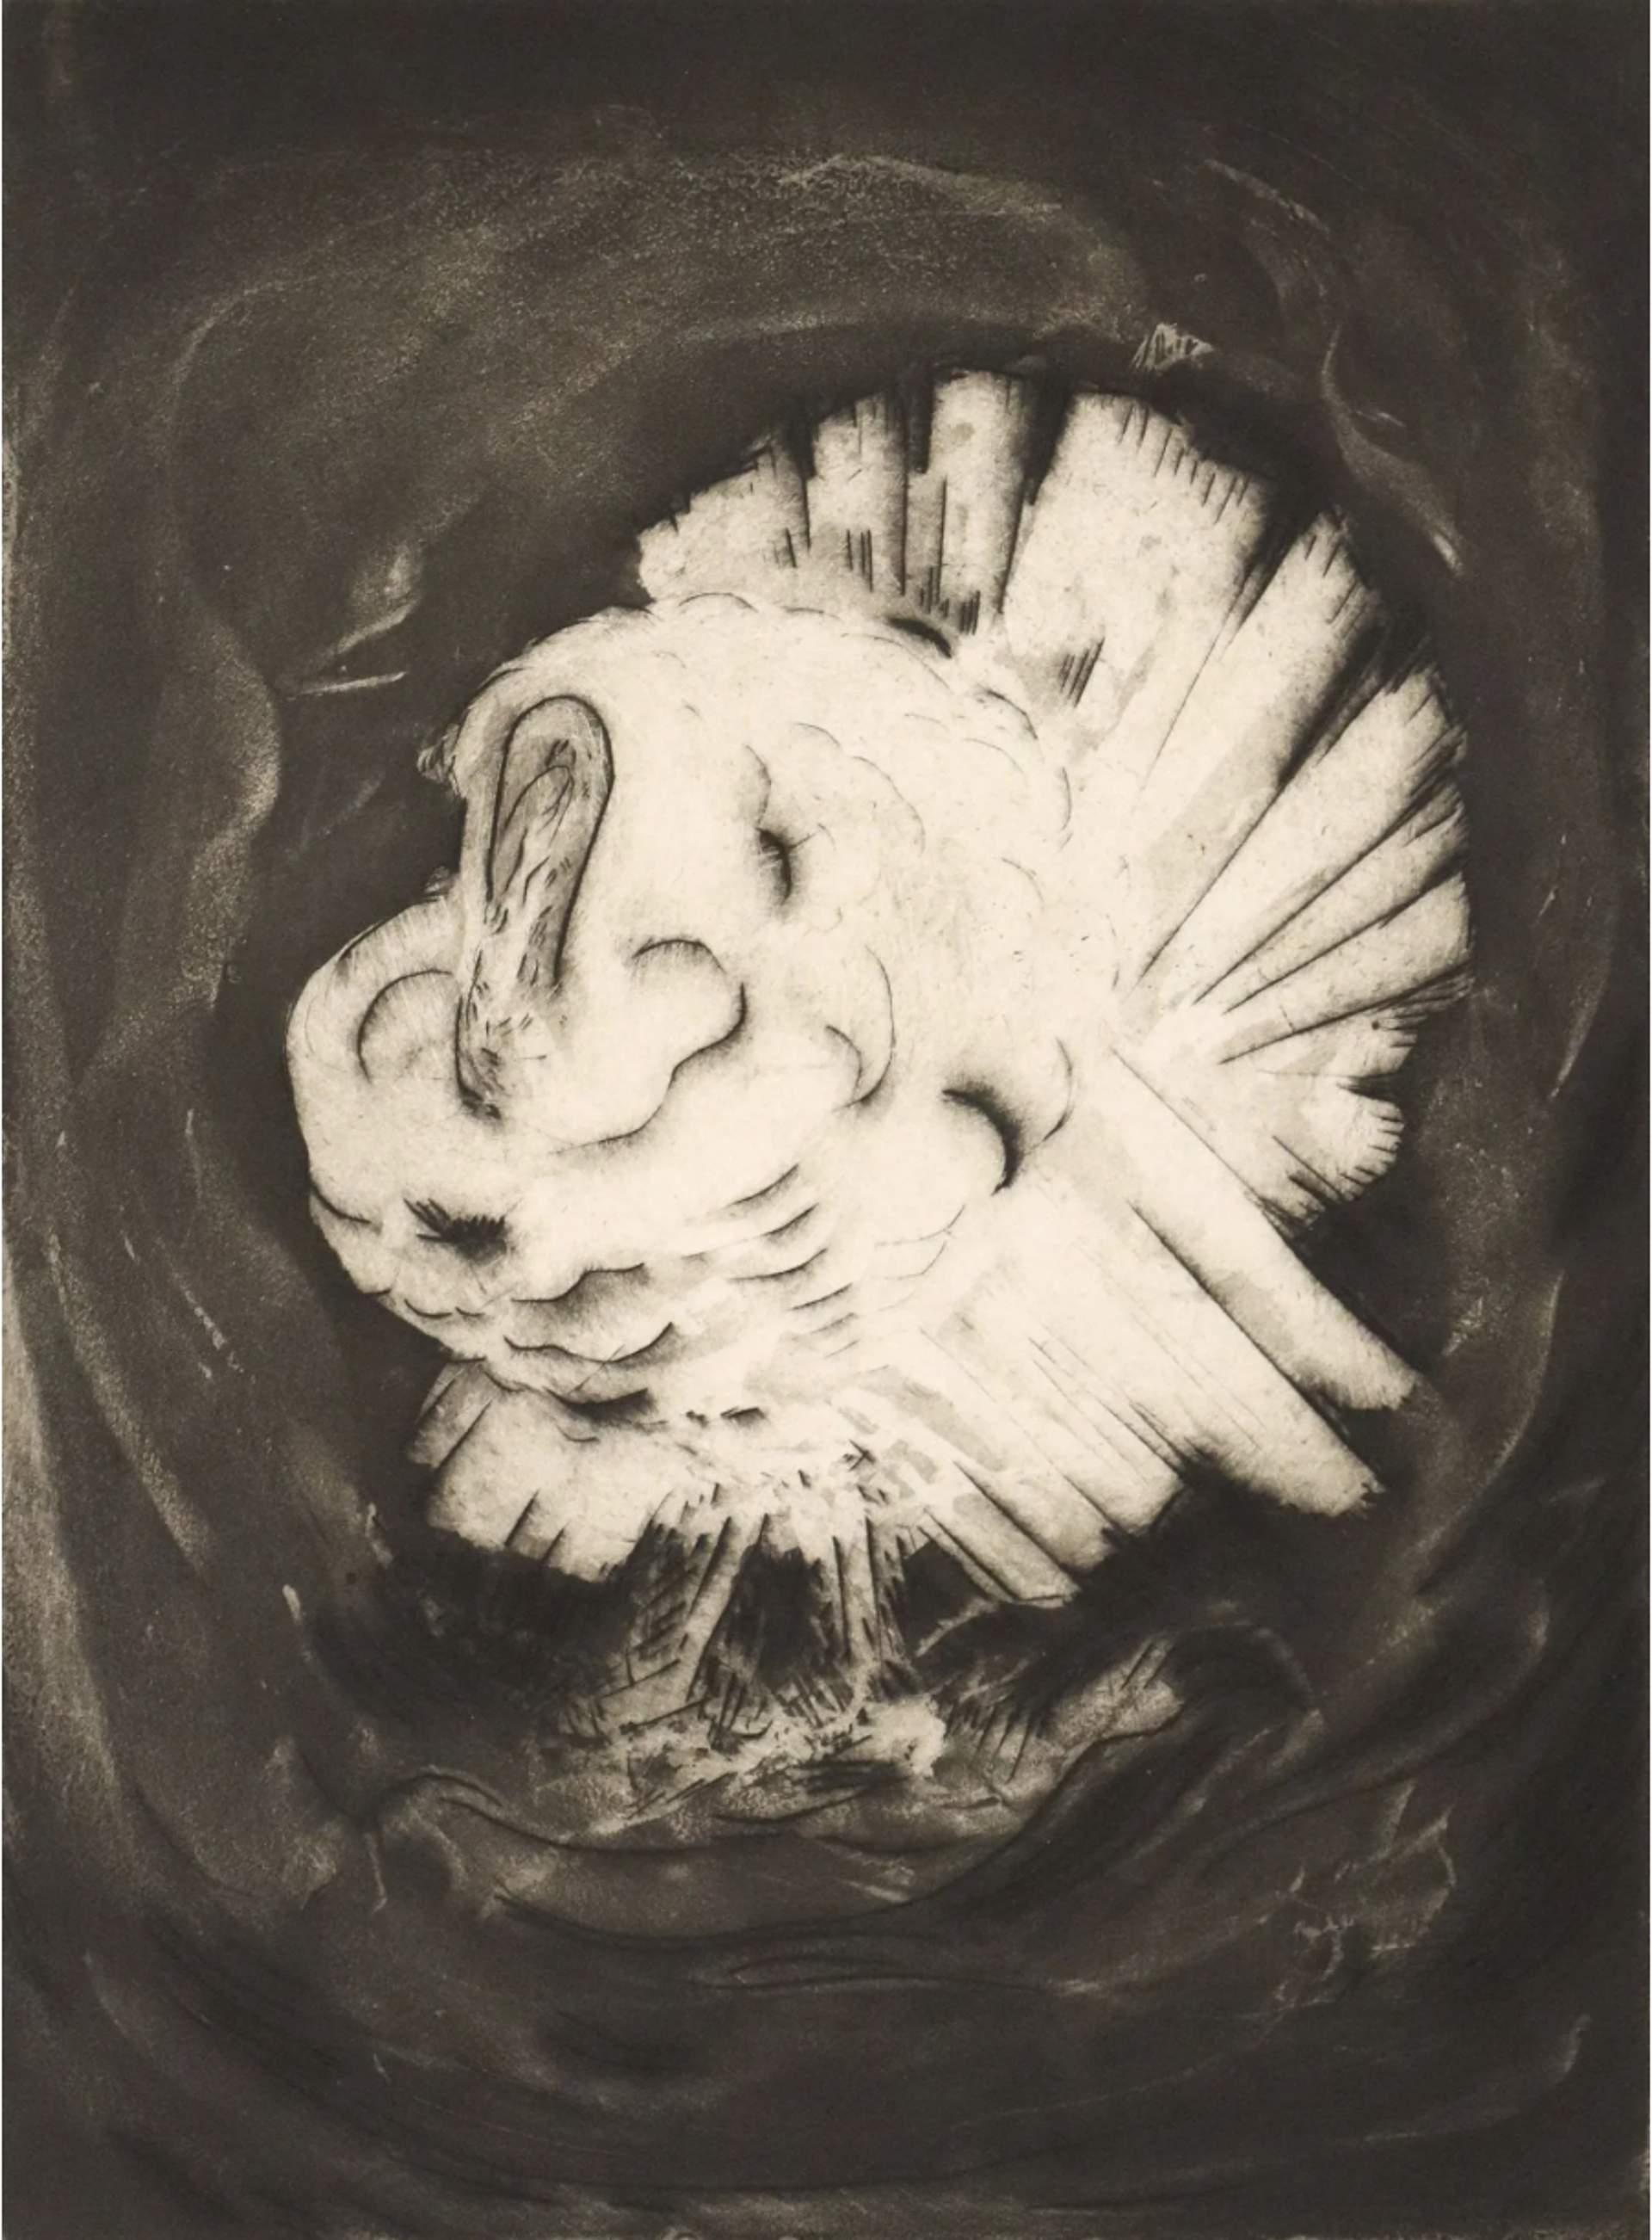 The White Turkey by Constance Forsyth